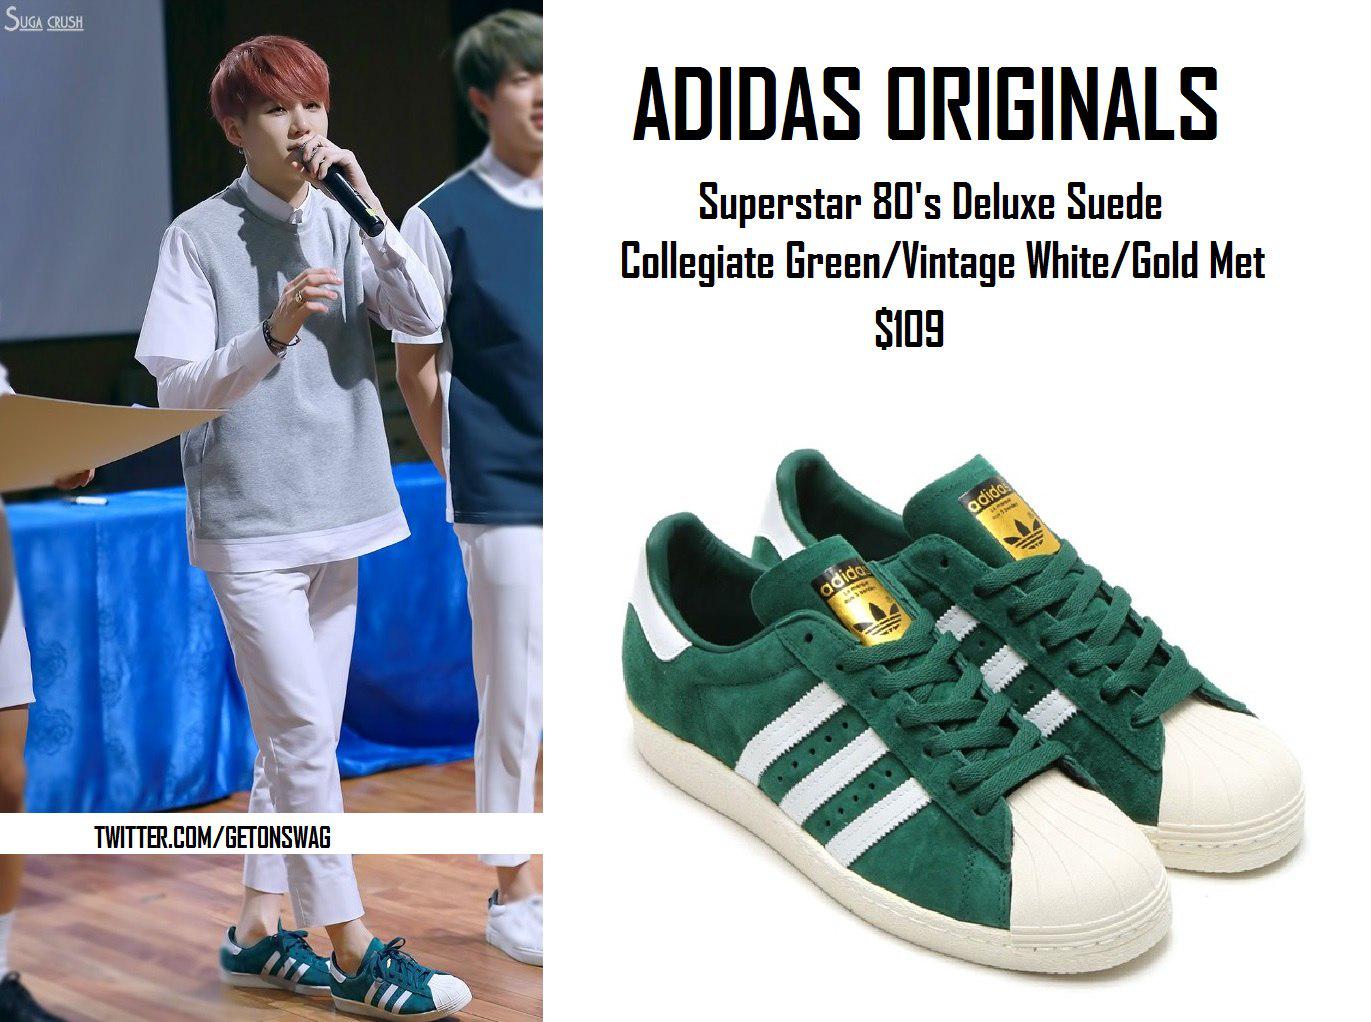 Beyond The Style ✼ ✼ on Twitter: "you know suga's adidas shoes green and gold?? — this one? https://t.co/XExuaFLtTS" / Twitter